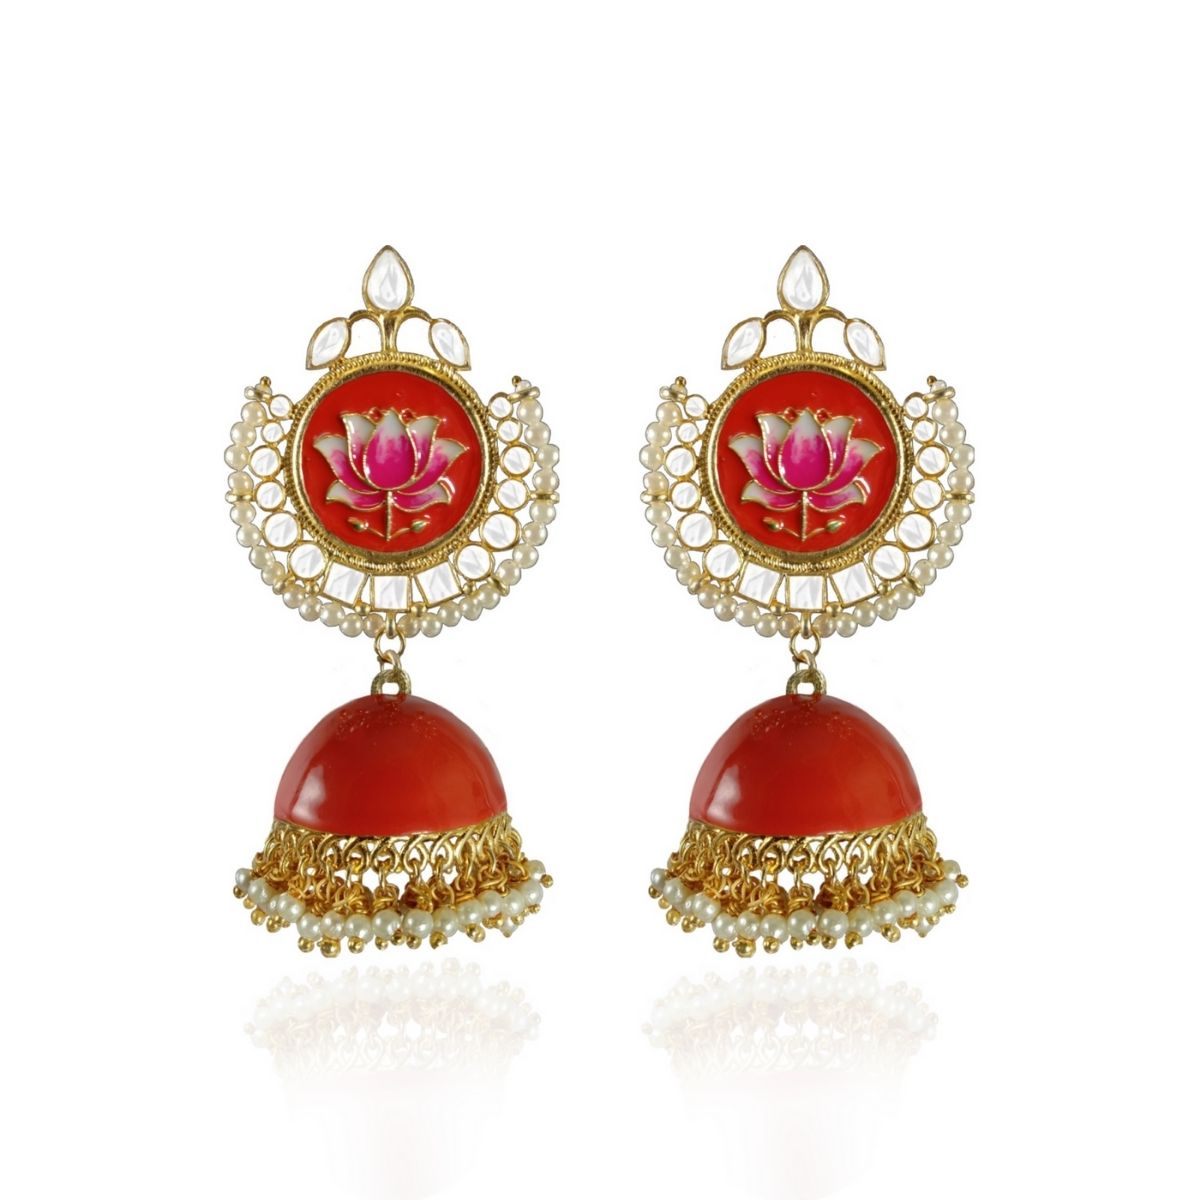 Classic Lotus floral Enamel Earrings For Women and Girls